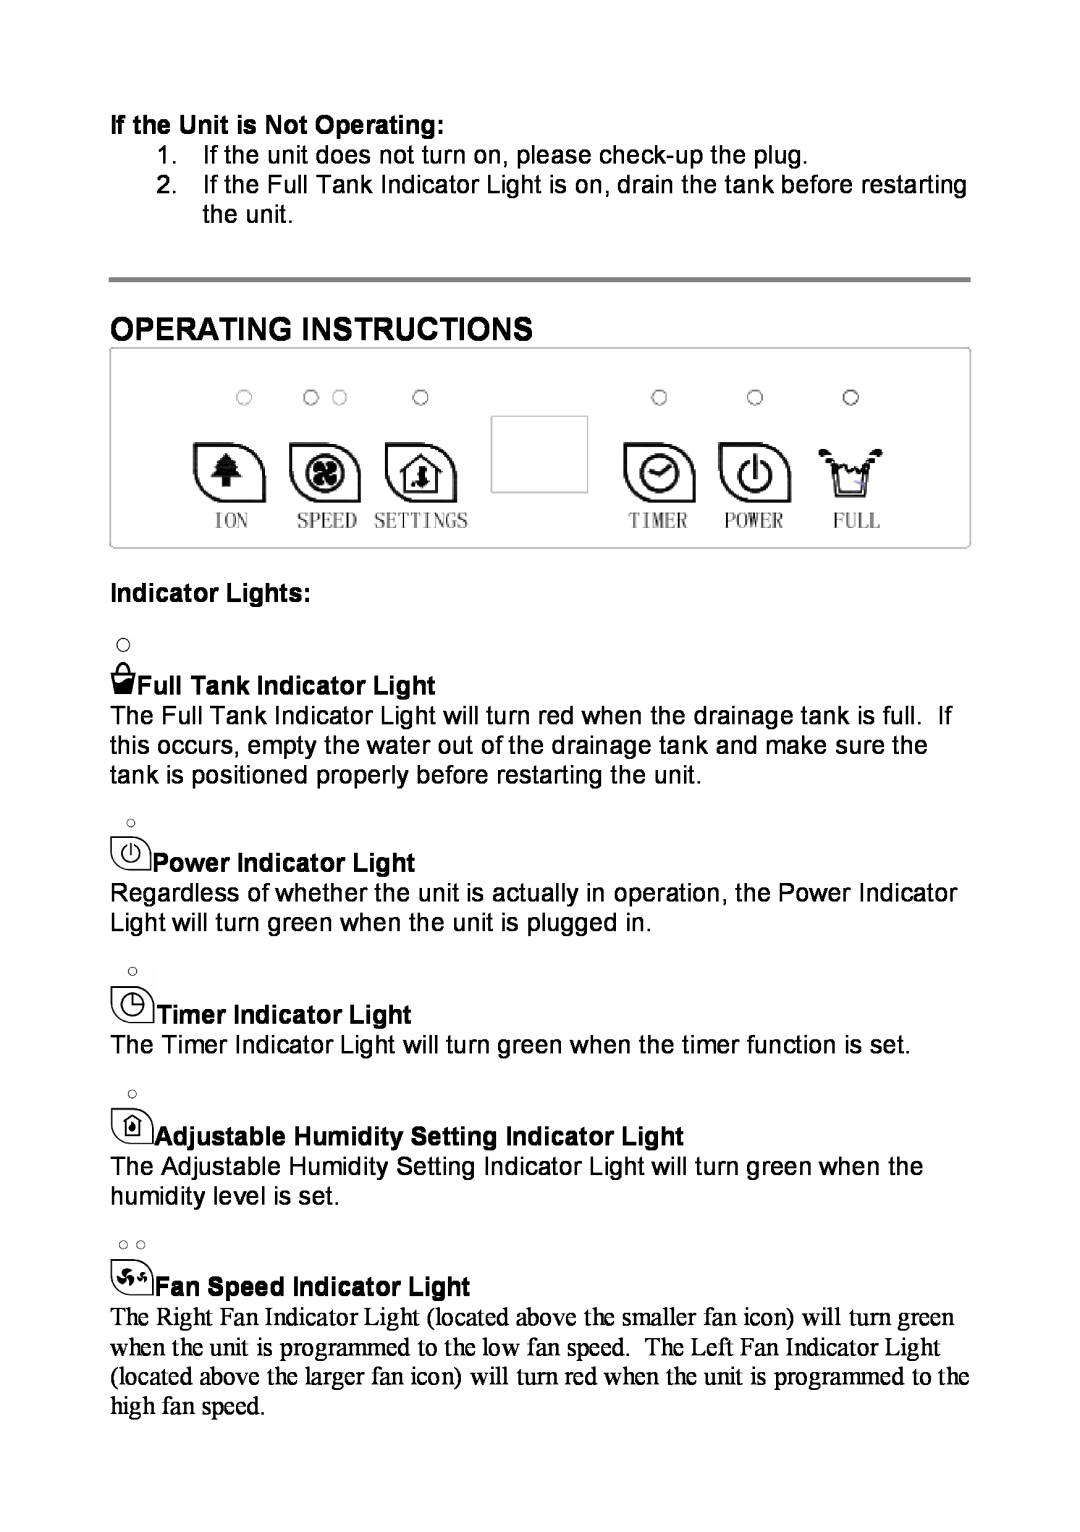 NewAir AD-400 manual Operating Instructions, If the Unit is Not Operating, Indicator Lights Full Tank Indicator Light 